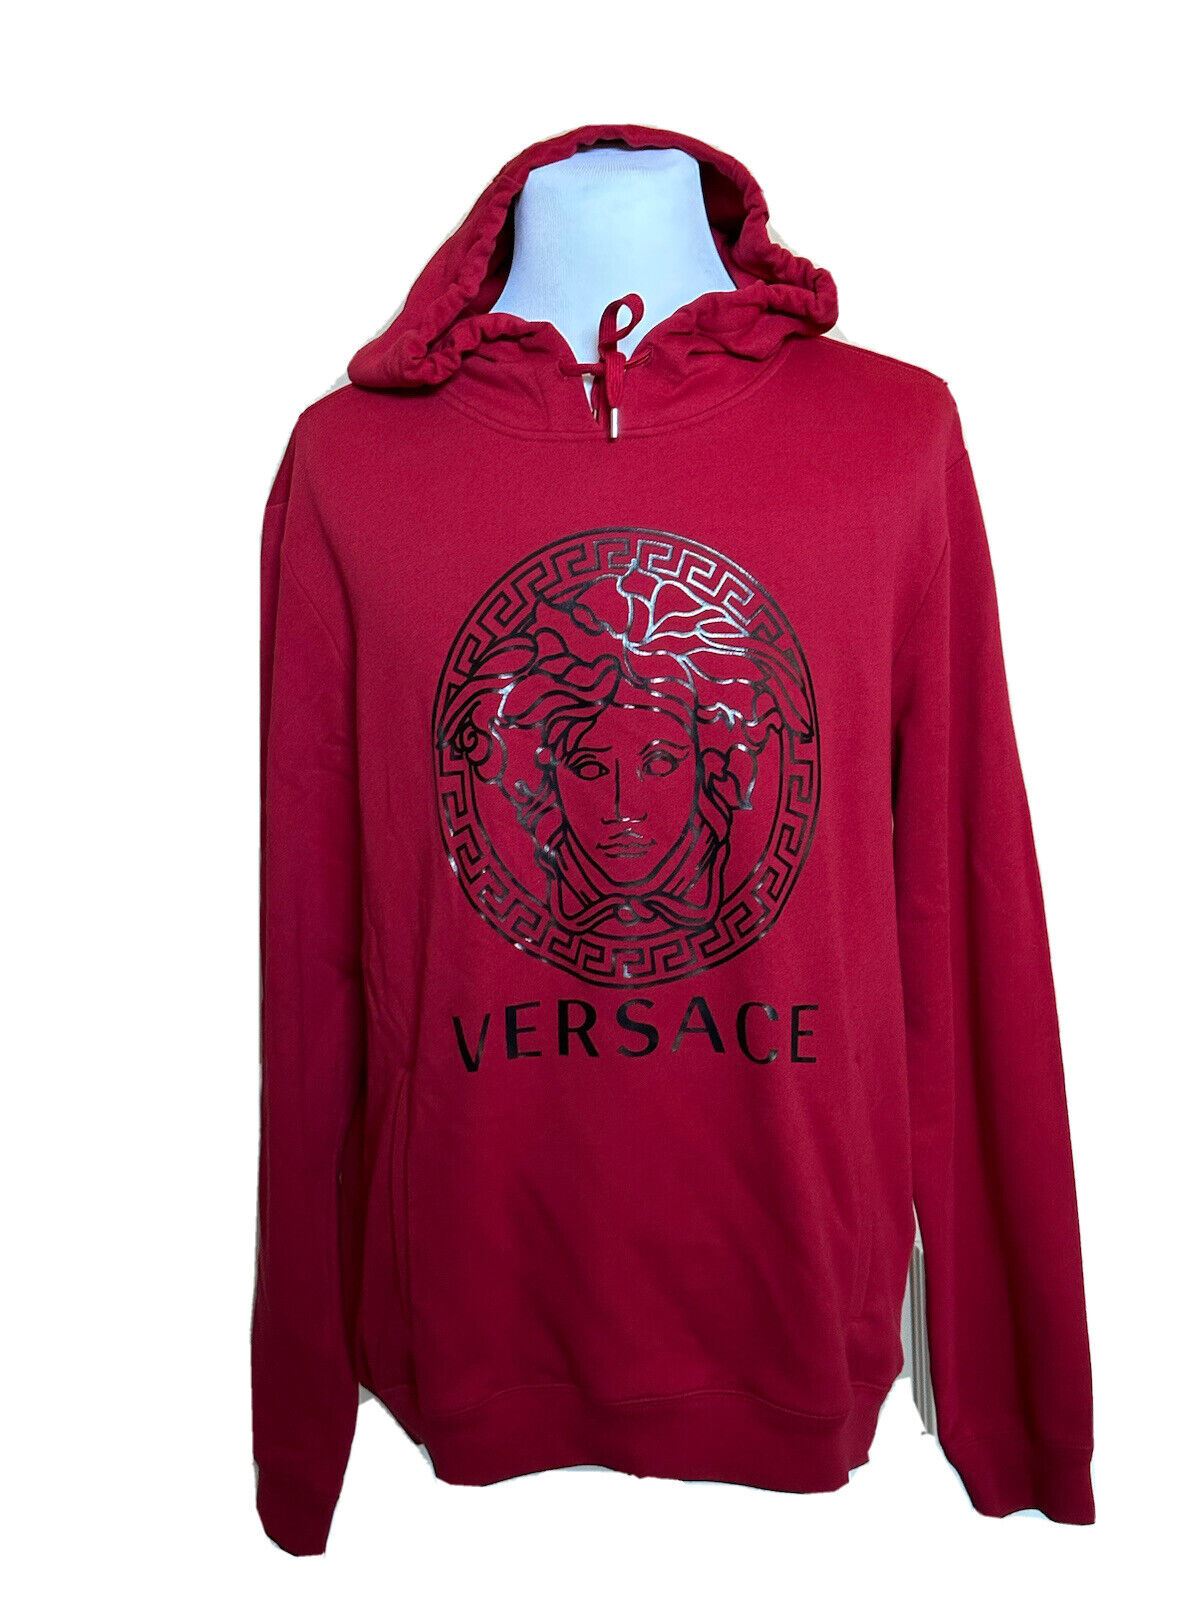 NWT $750 Versace Medusa Print Red Cotton Sweatshirt with Hoodie 4XL A89514S IT